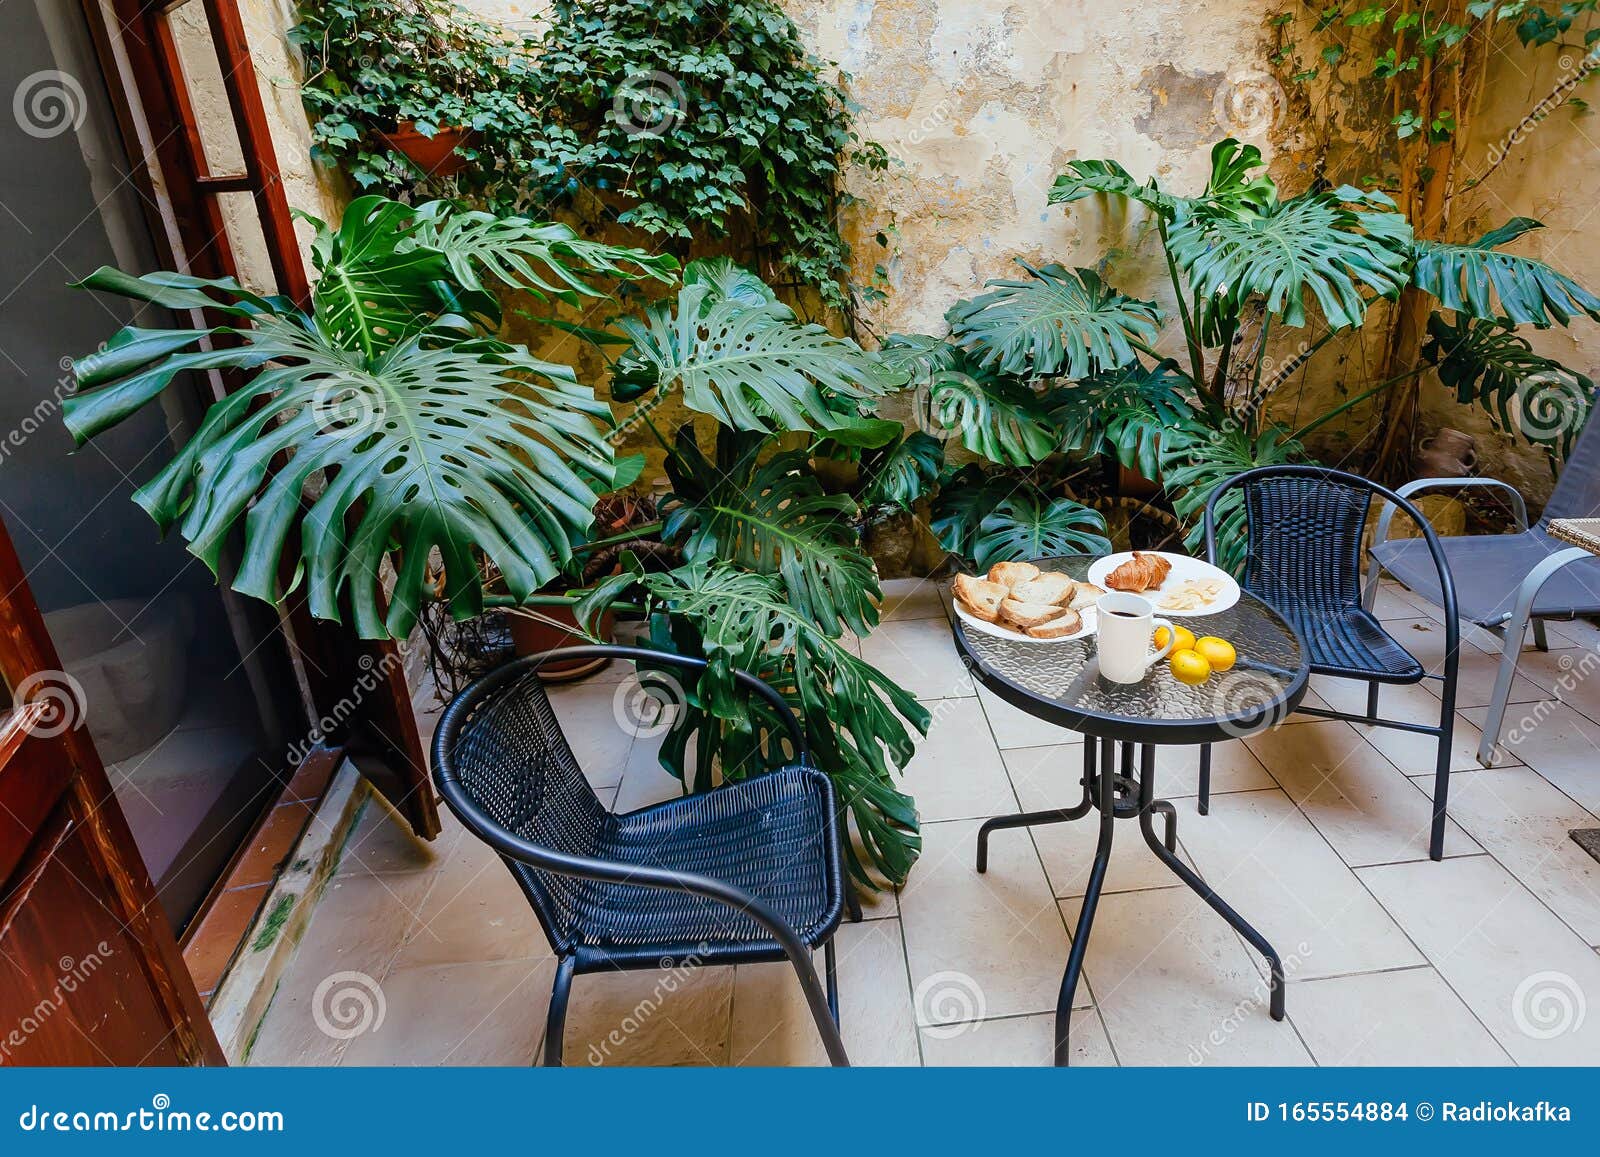 table with breakfast plates in small green courtyard of historical house in mediterranian region. romantic holidays